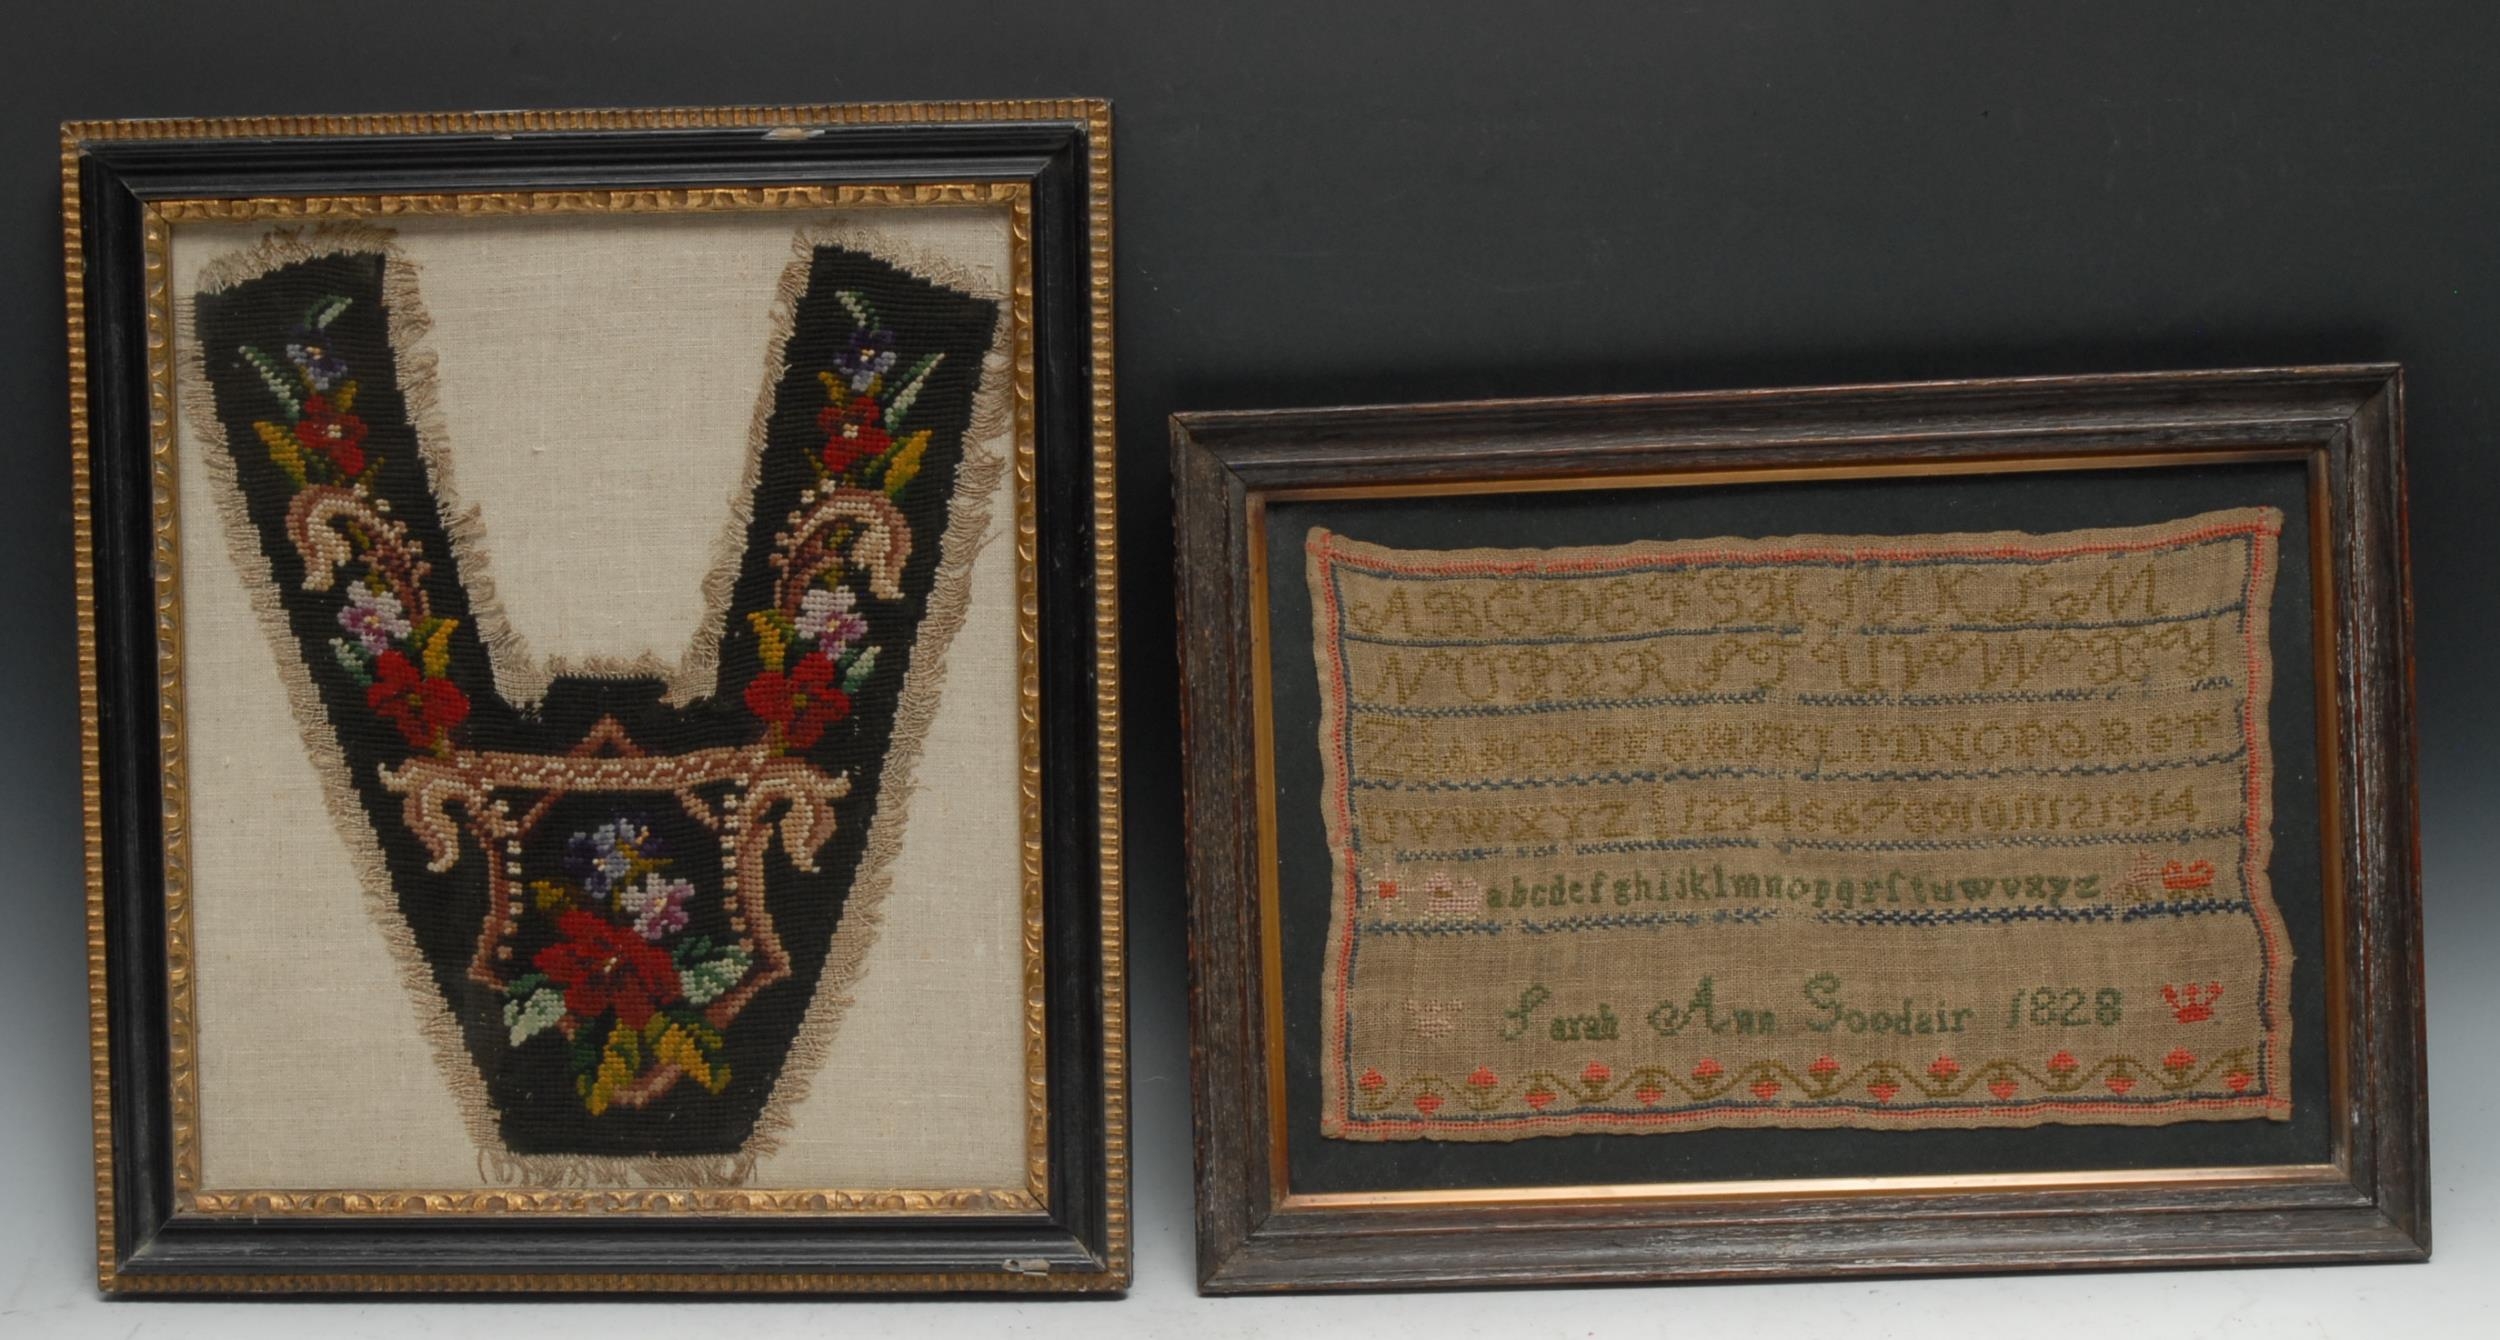 A George IV needlework sampler, Sarah Ann Goodair 1828, worked in coloured wools with alphabet and